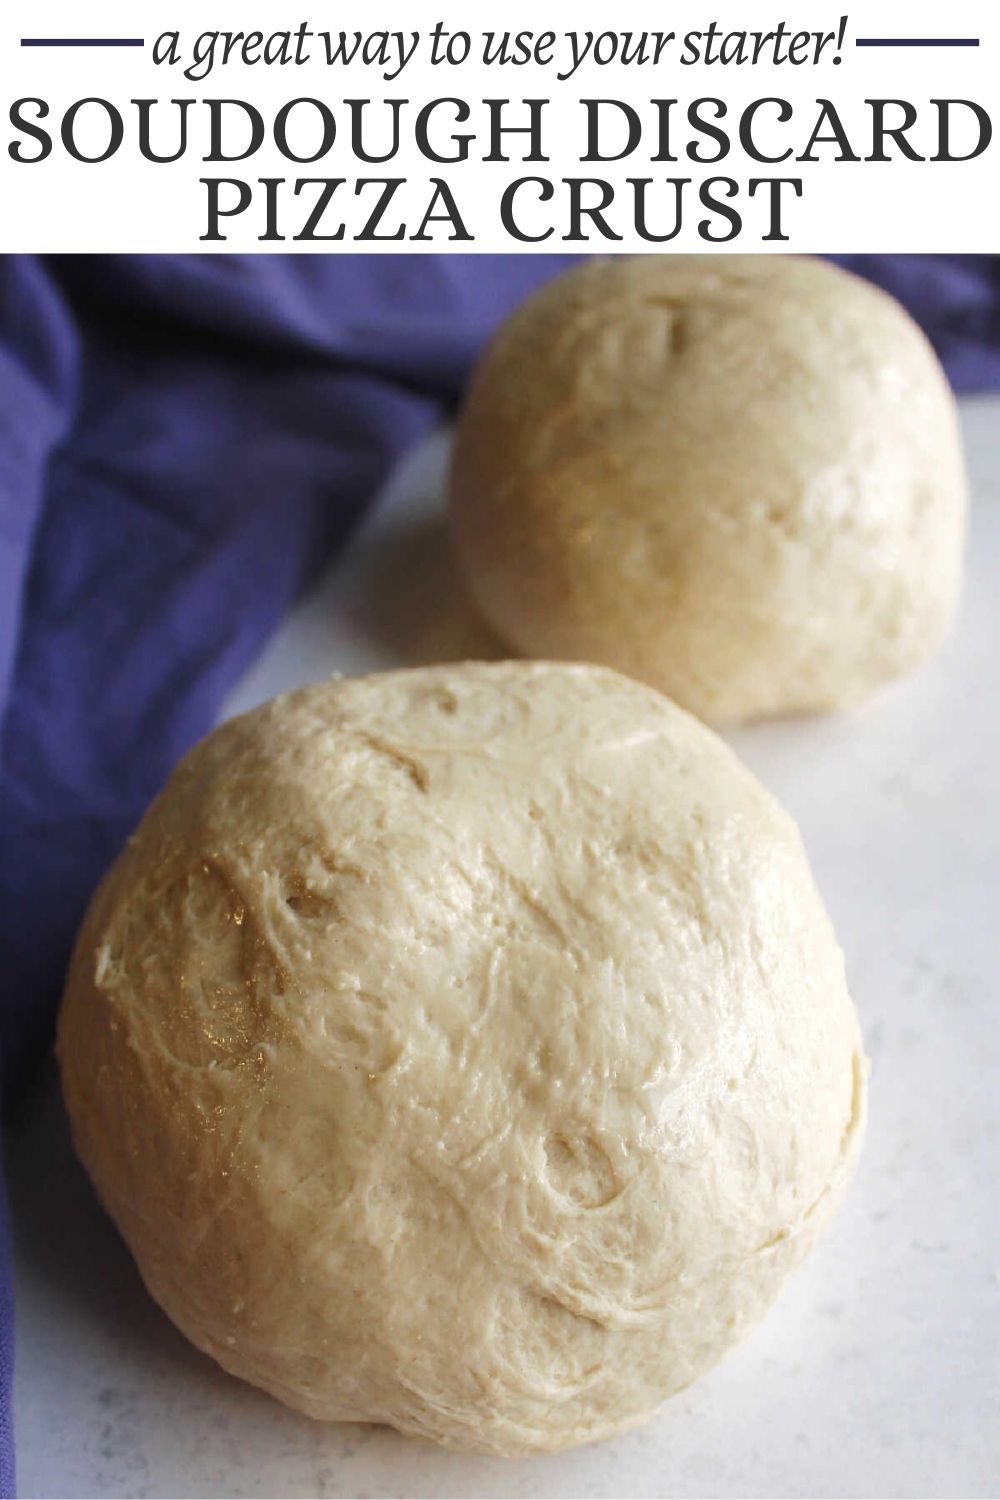 Turn sourdough discard into a delicious pizza crust! It is a great way to use your starter in a quick and easy recipe.